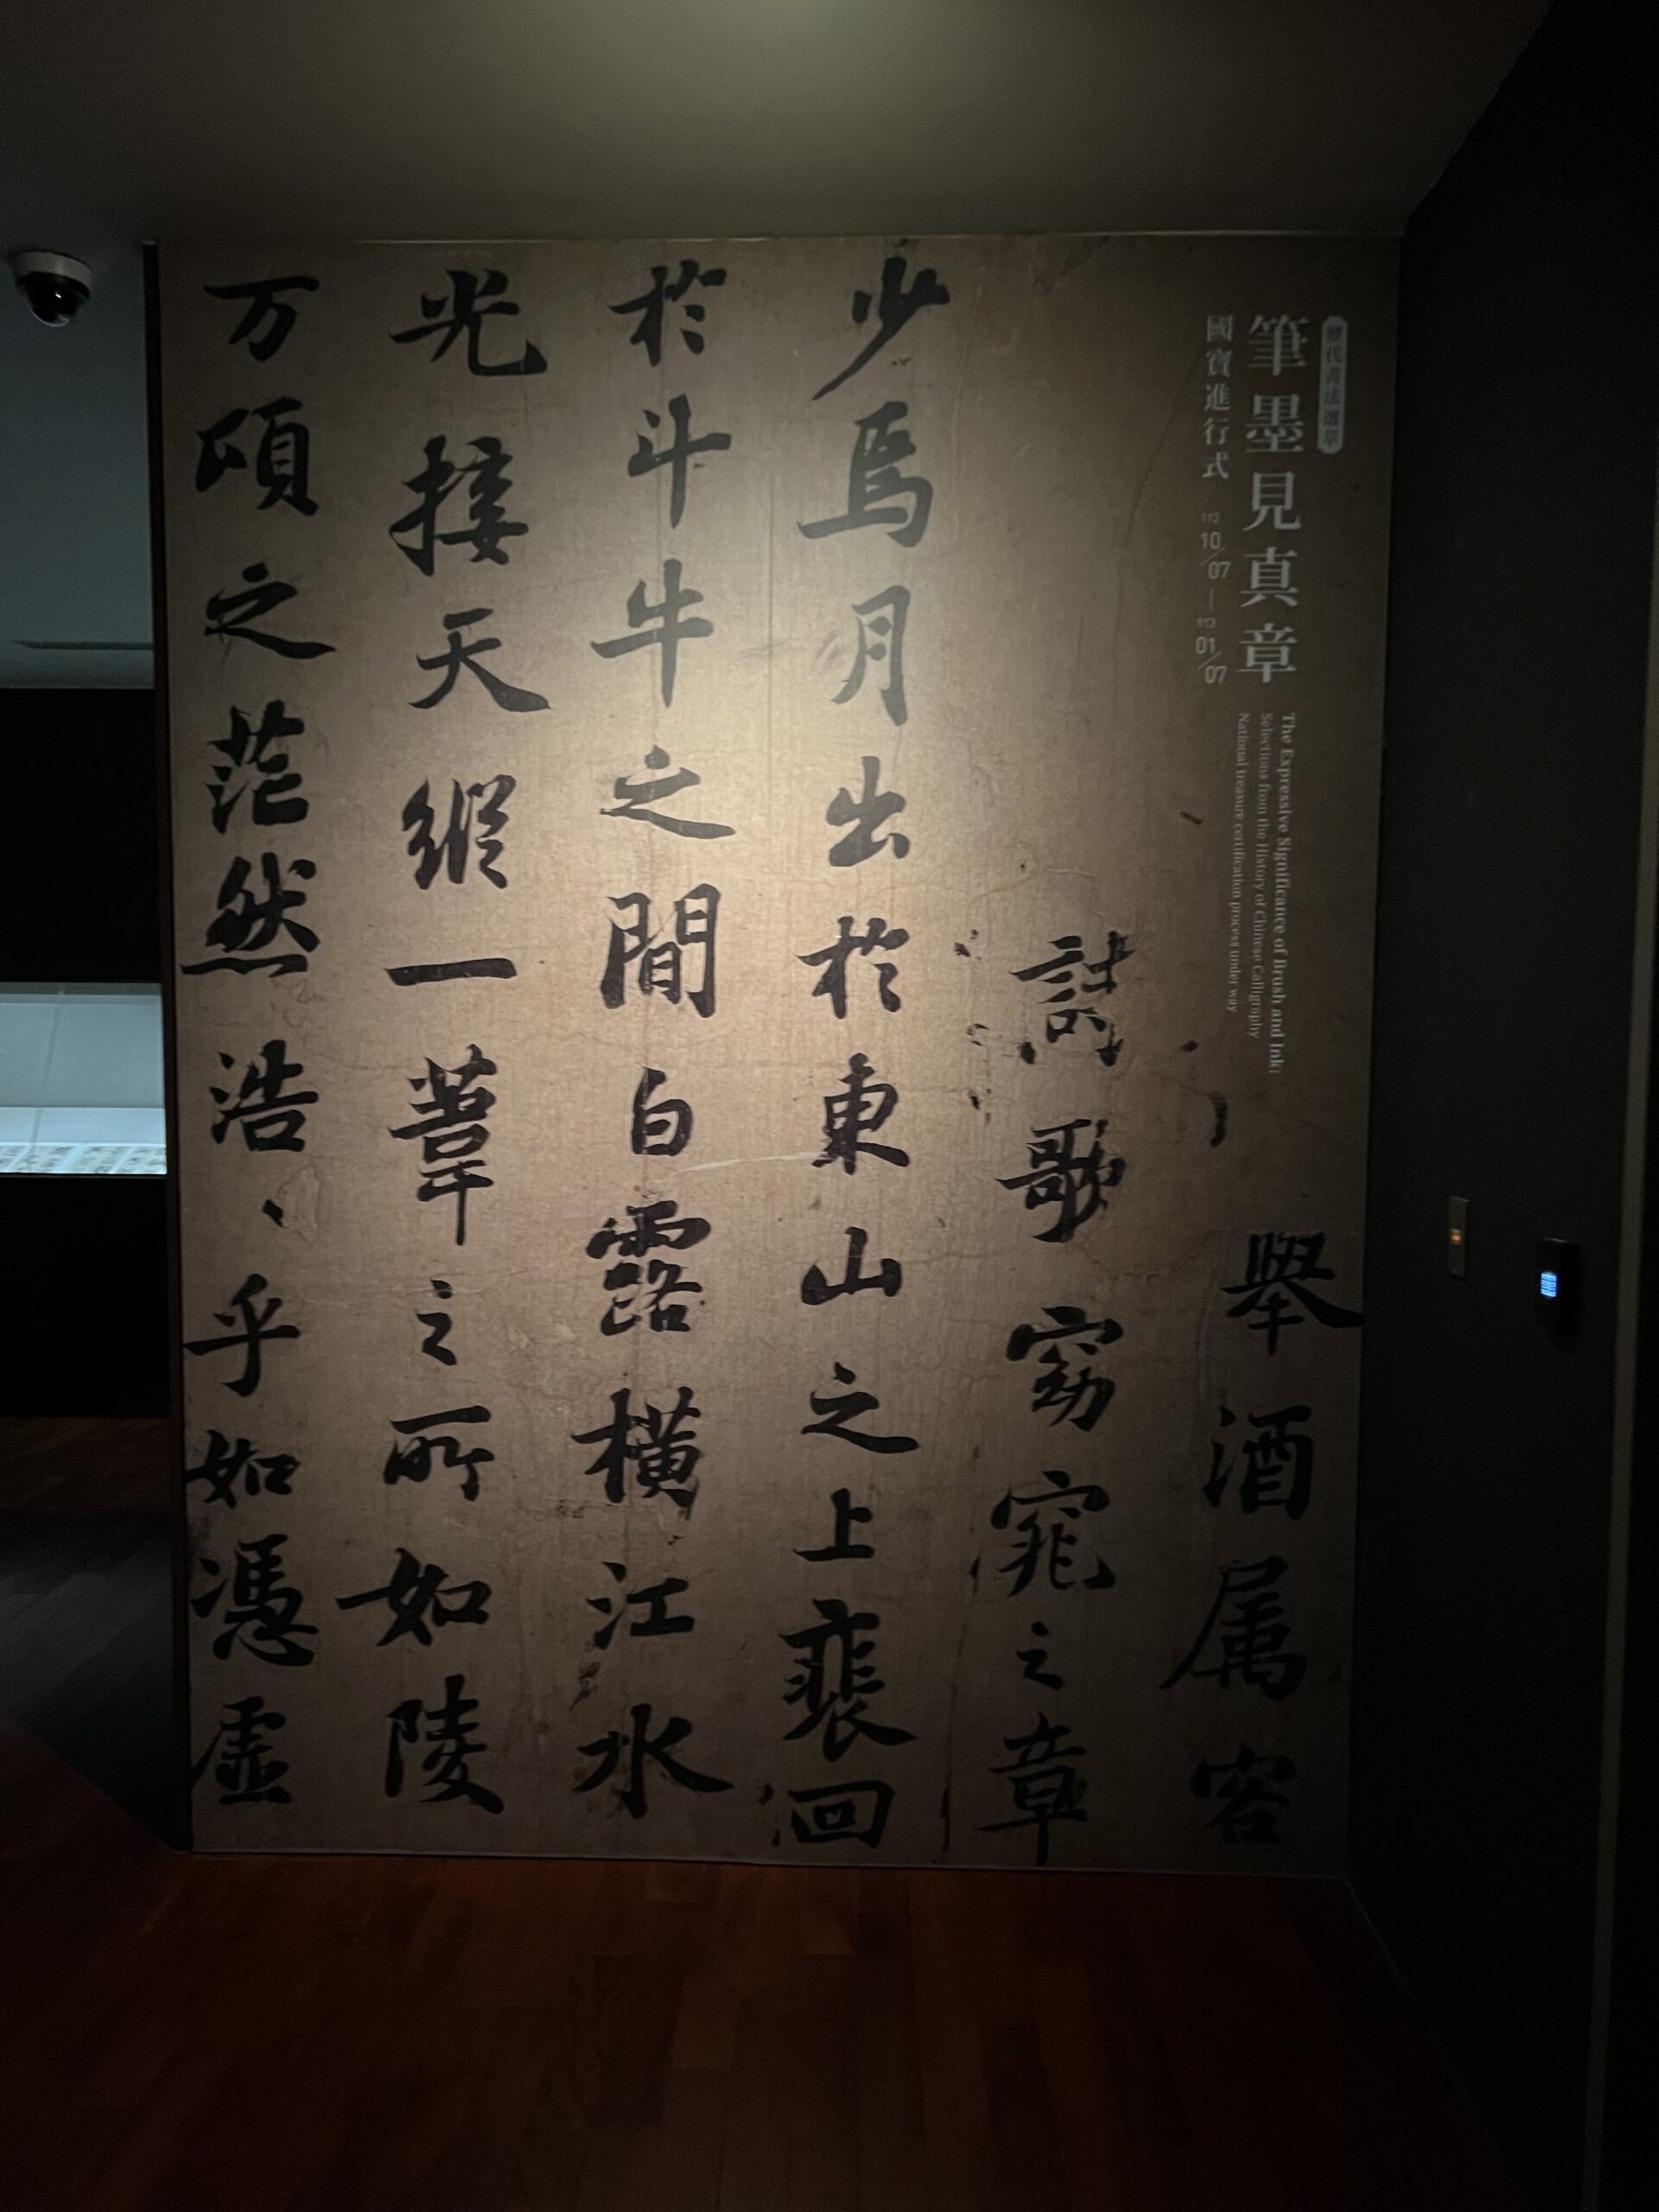 Visiting Taipei and the National Palace Museum / 台北の故宮博物院を訪れて